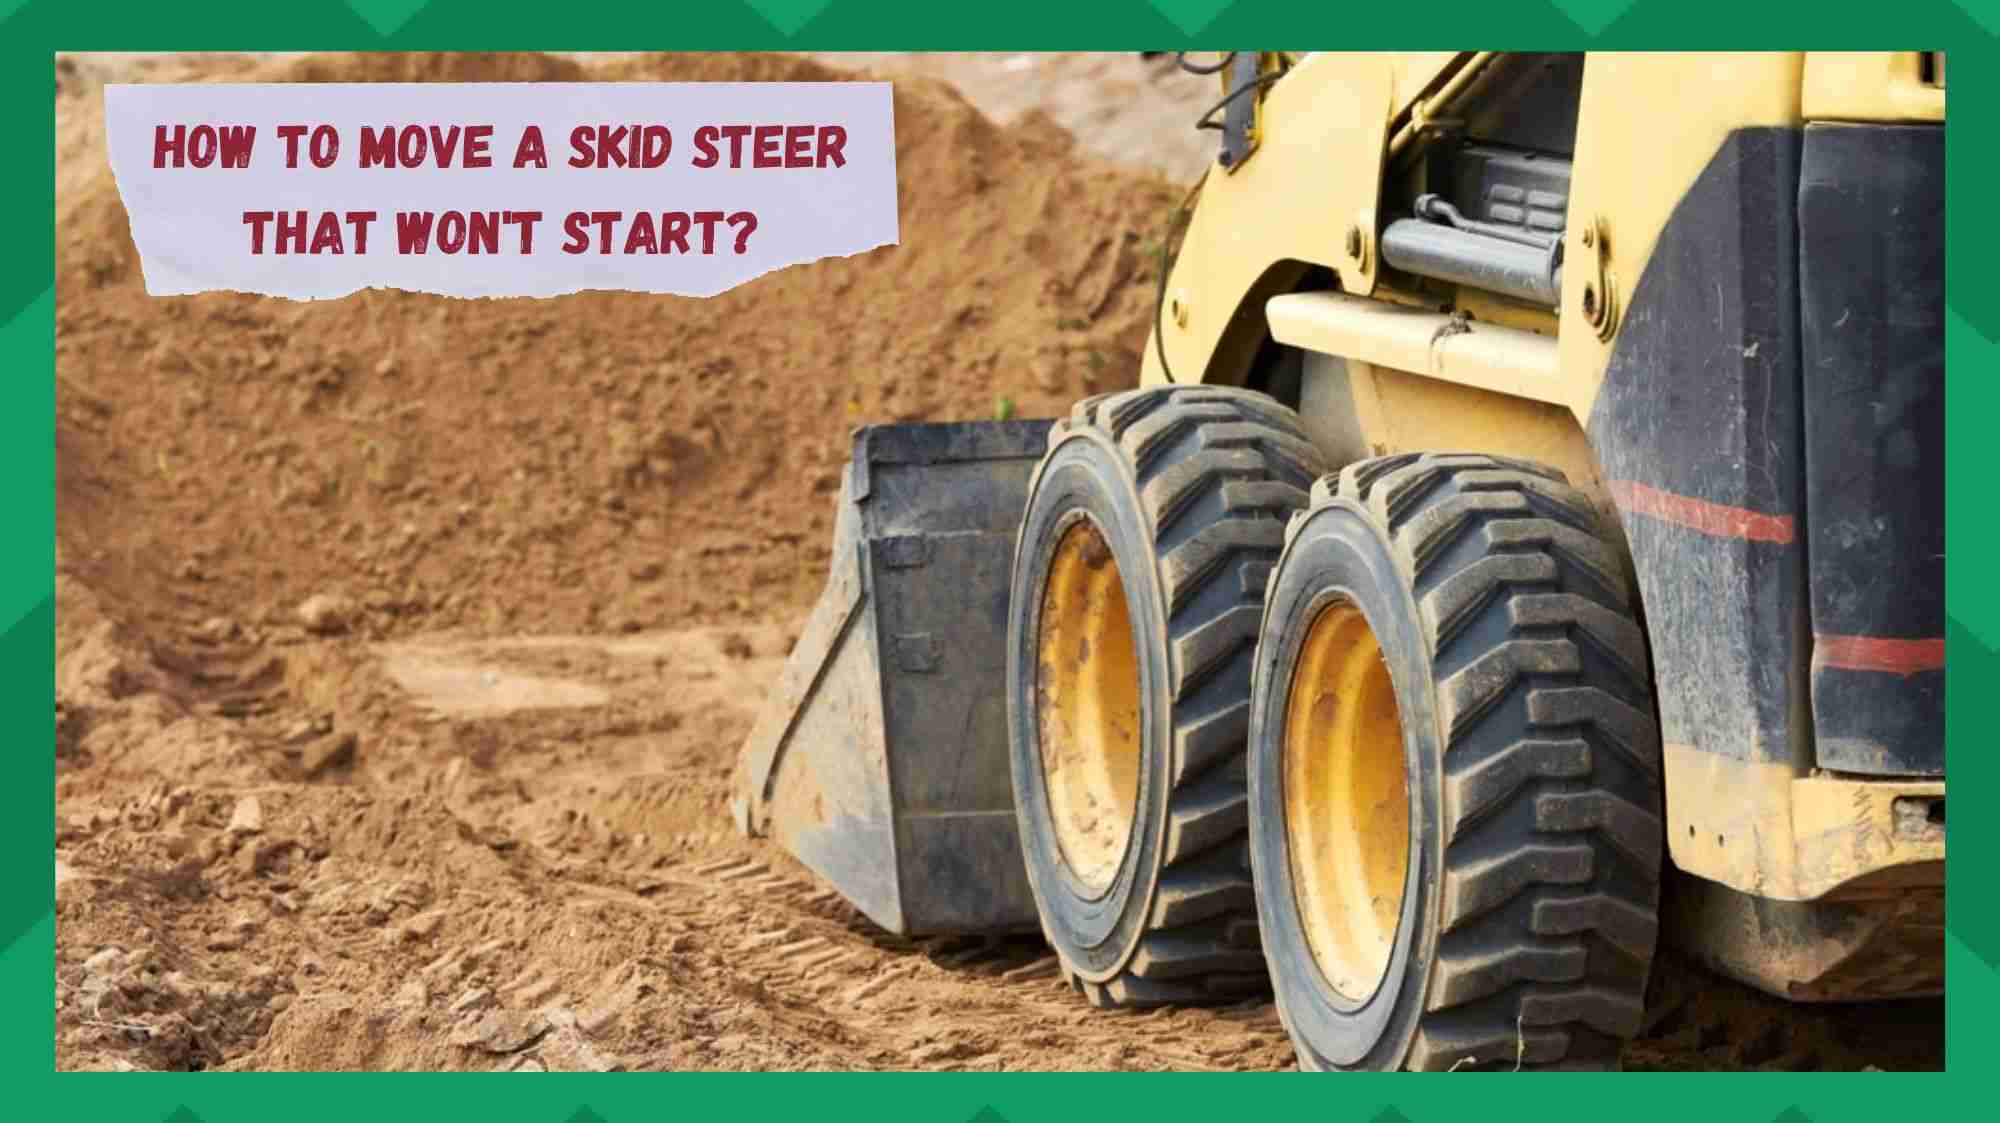 how to move a skid steer that won't start